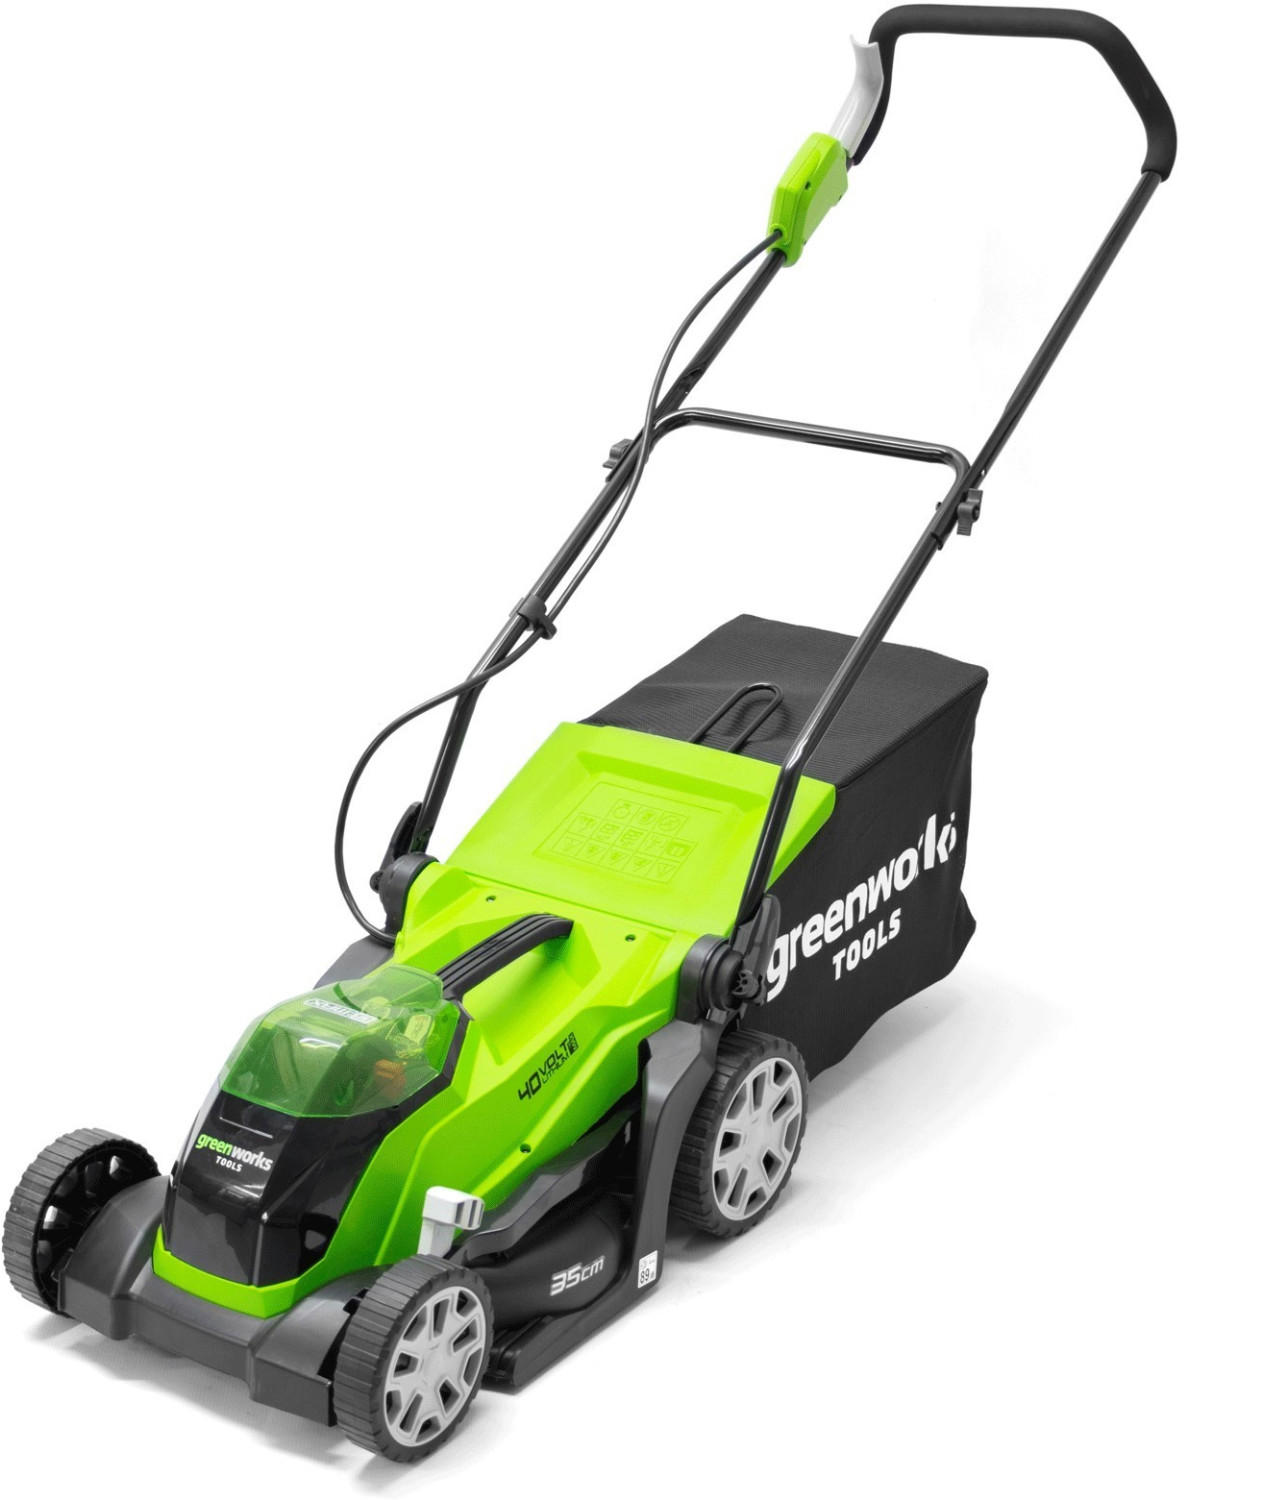 Greenworks G40LM35 Cordless Lawn Mower (2Ah Battery & Charger Incl.)